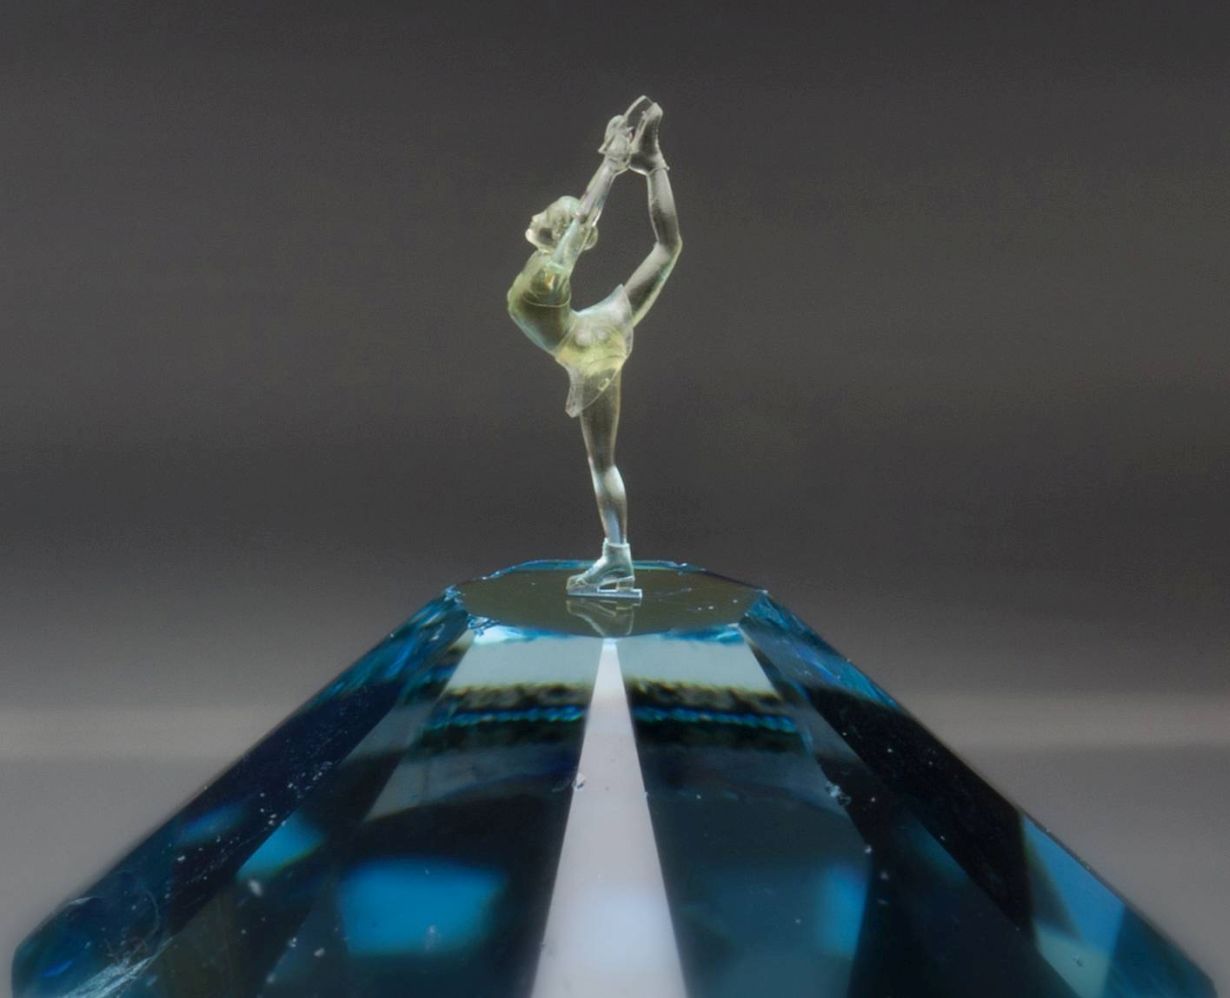 The figure skater of only 3 mm height was printed onto the tip of a crystal. (Photo: Nanoscribe)